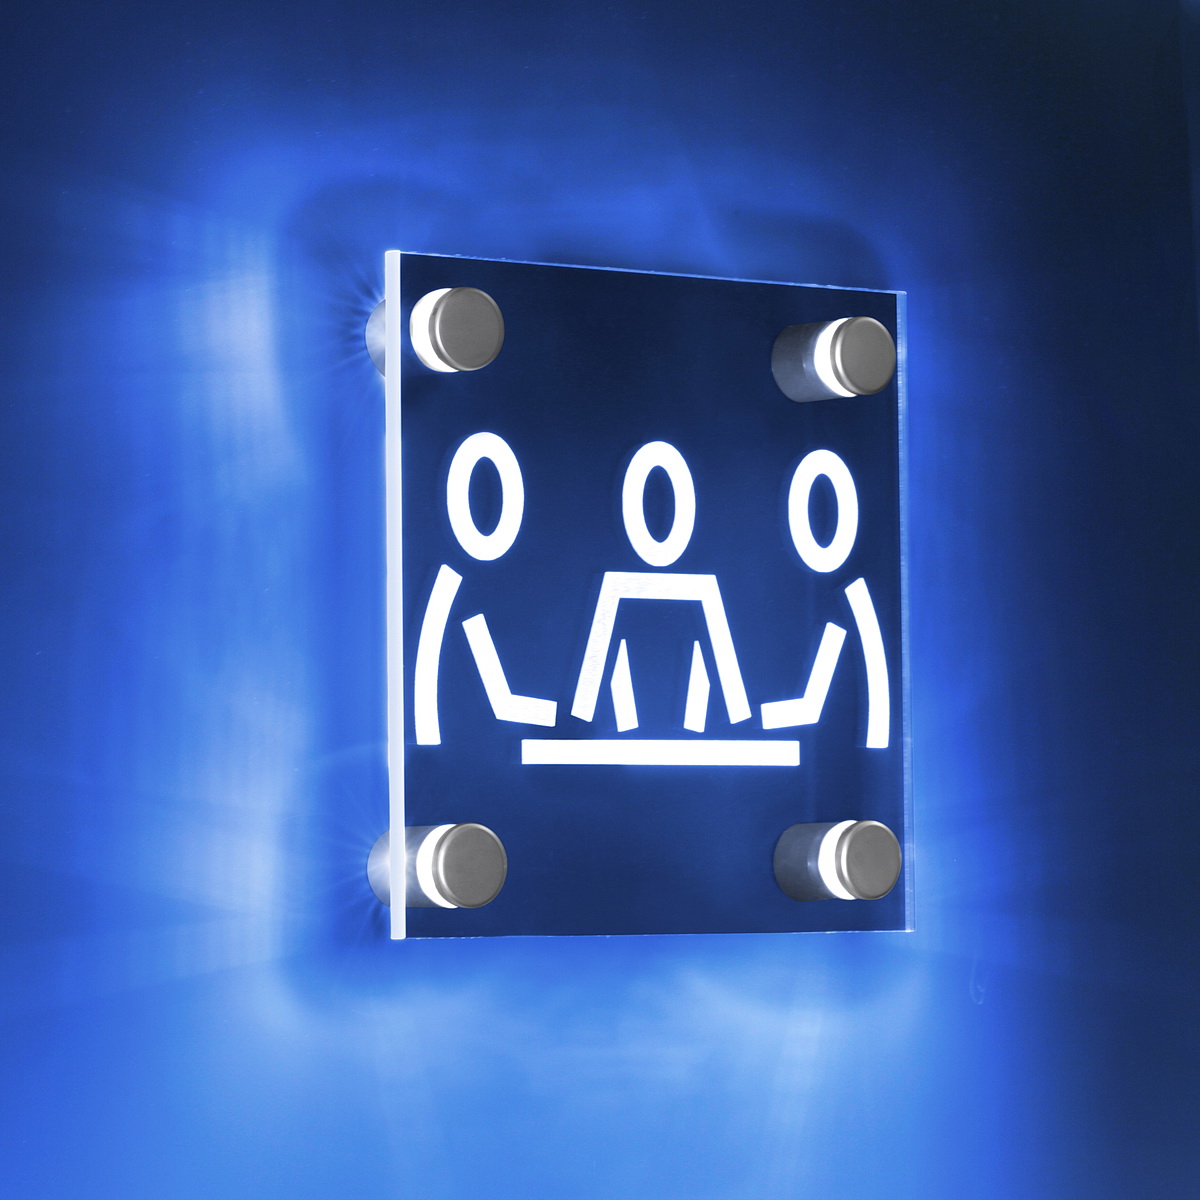 4 - BLUE LED Standoffs (1'' x 1'' Silver satin aluminum finish) Mount Kit Supports Signs Up To 3/8'' Thick, Wall Mount, Low Voltage transformer included. [Required Material Hole Size: 7/8'']